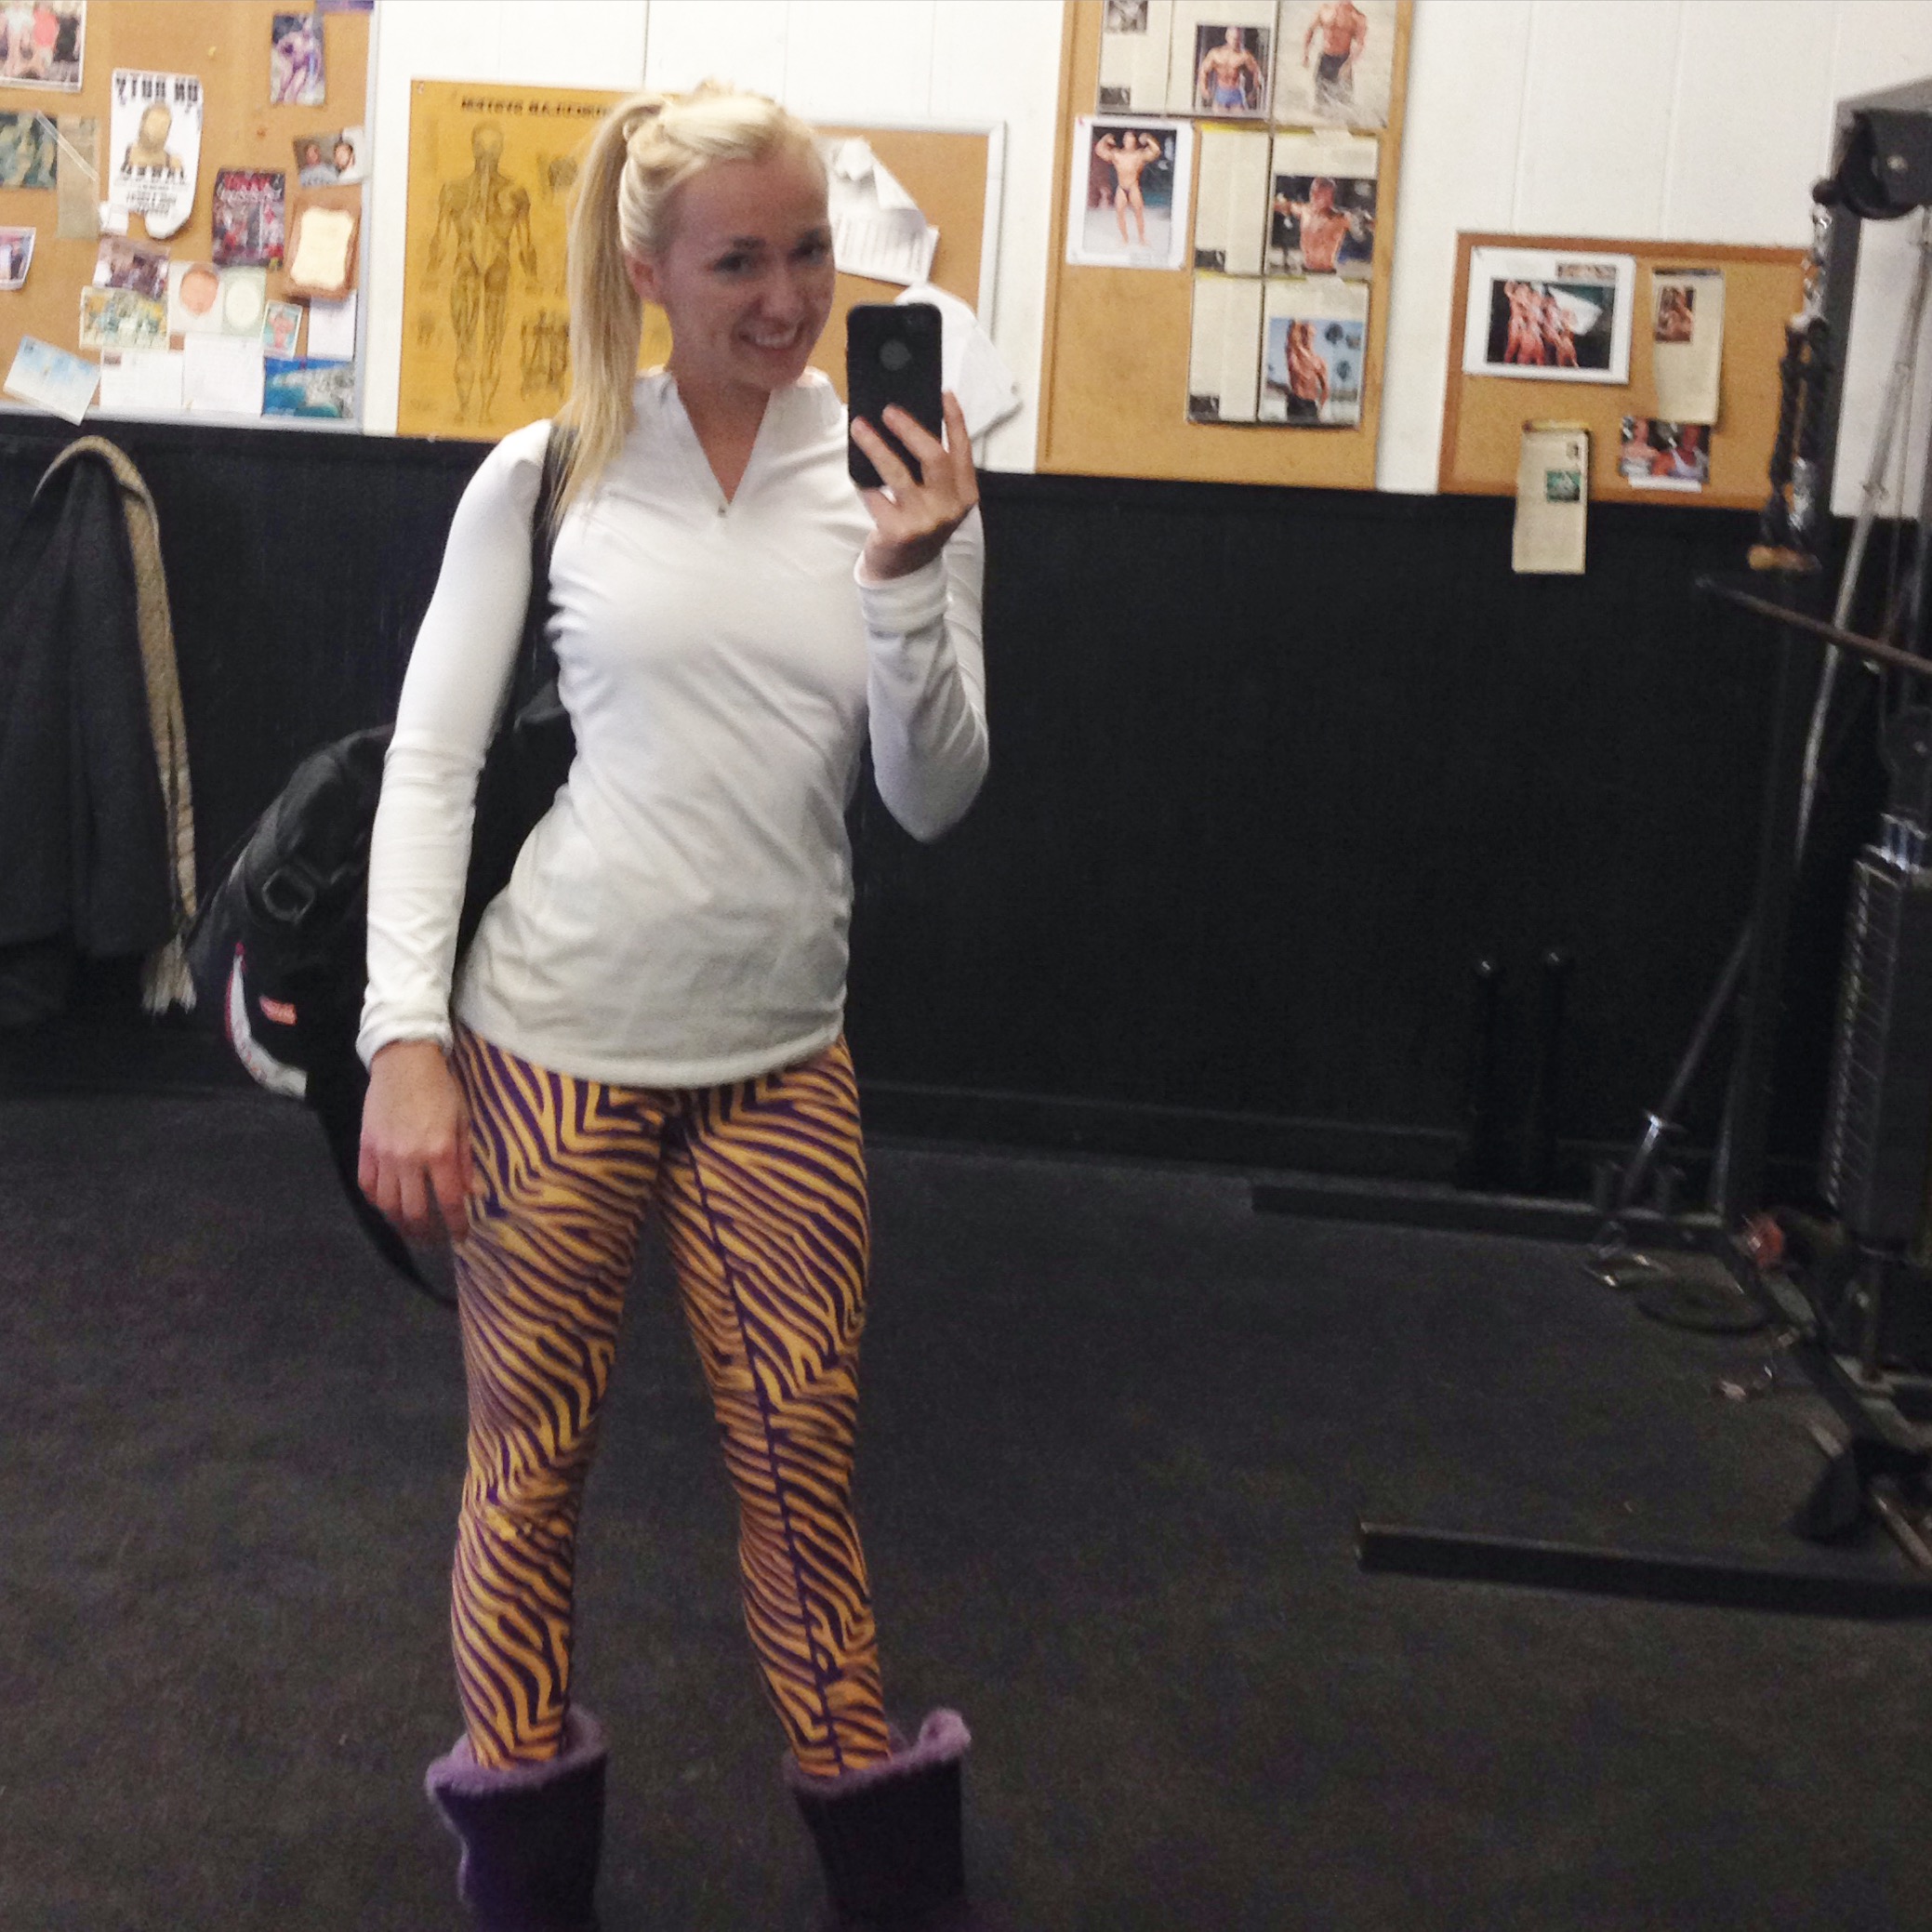 Don't lift in Uggs either, unless they are purple. #geauxtigers